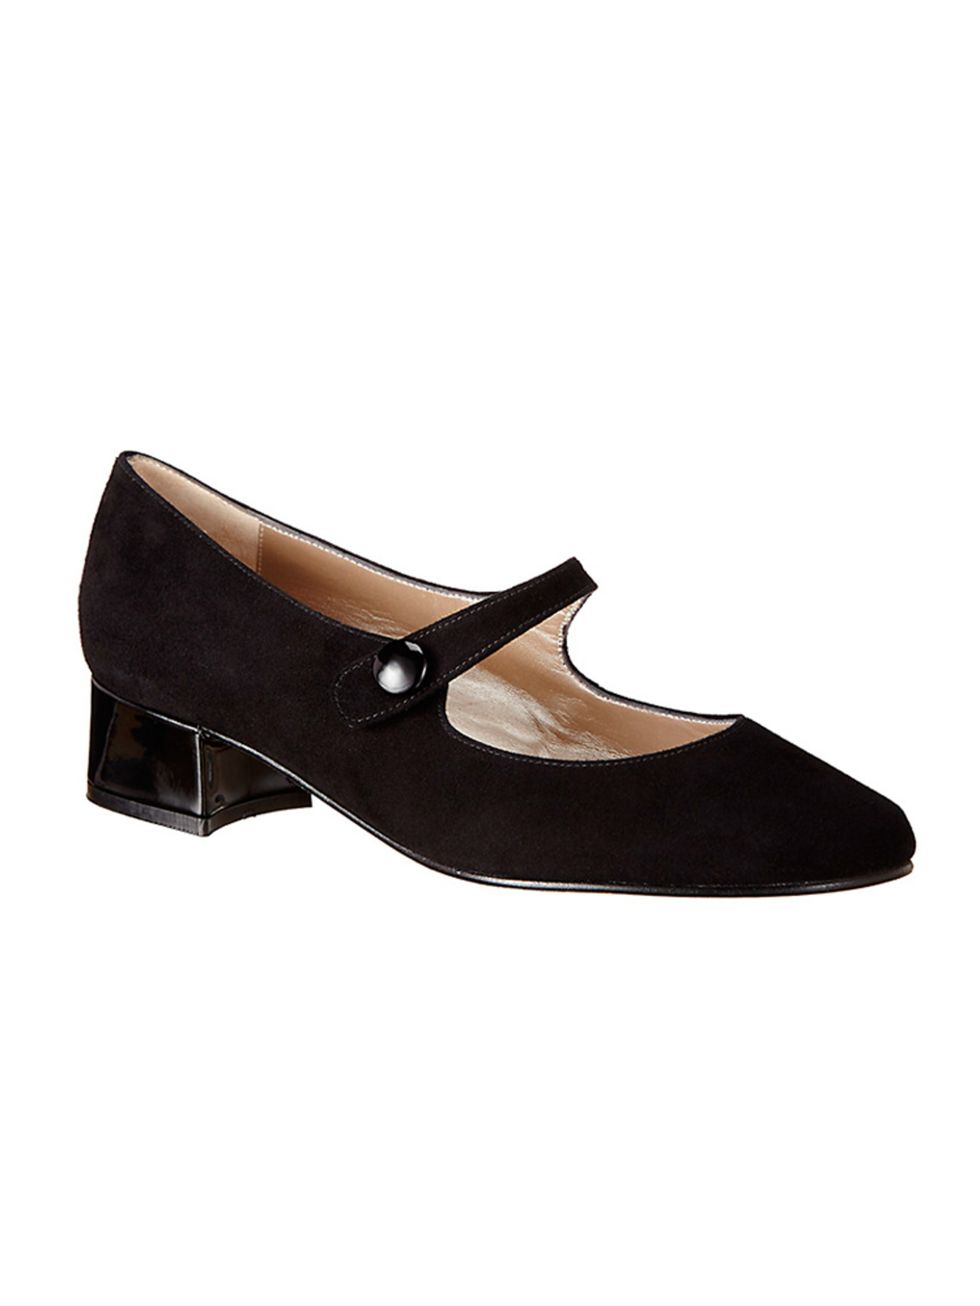 <p><a href="http://www.johnlewis.com/john-lewis-alice-block-heeled-mary-jane-courts-black-suede/p1991293?s_afcid=af_92295&awc=1203_1437410717_494db62ada4241b3f90736342cfe8428" target="_blank">John Lewis</a> shoes, £65</p>